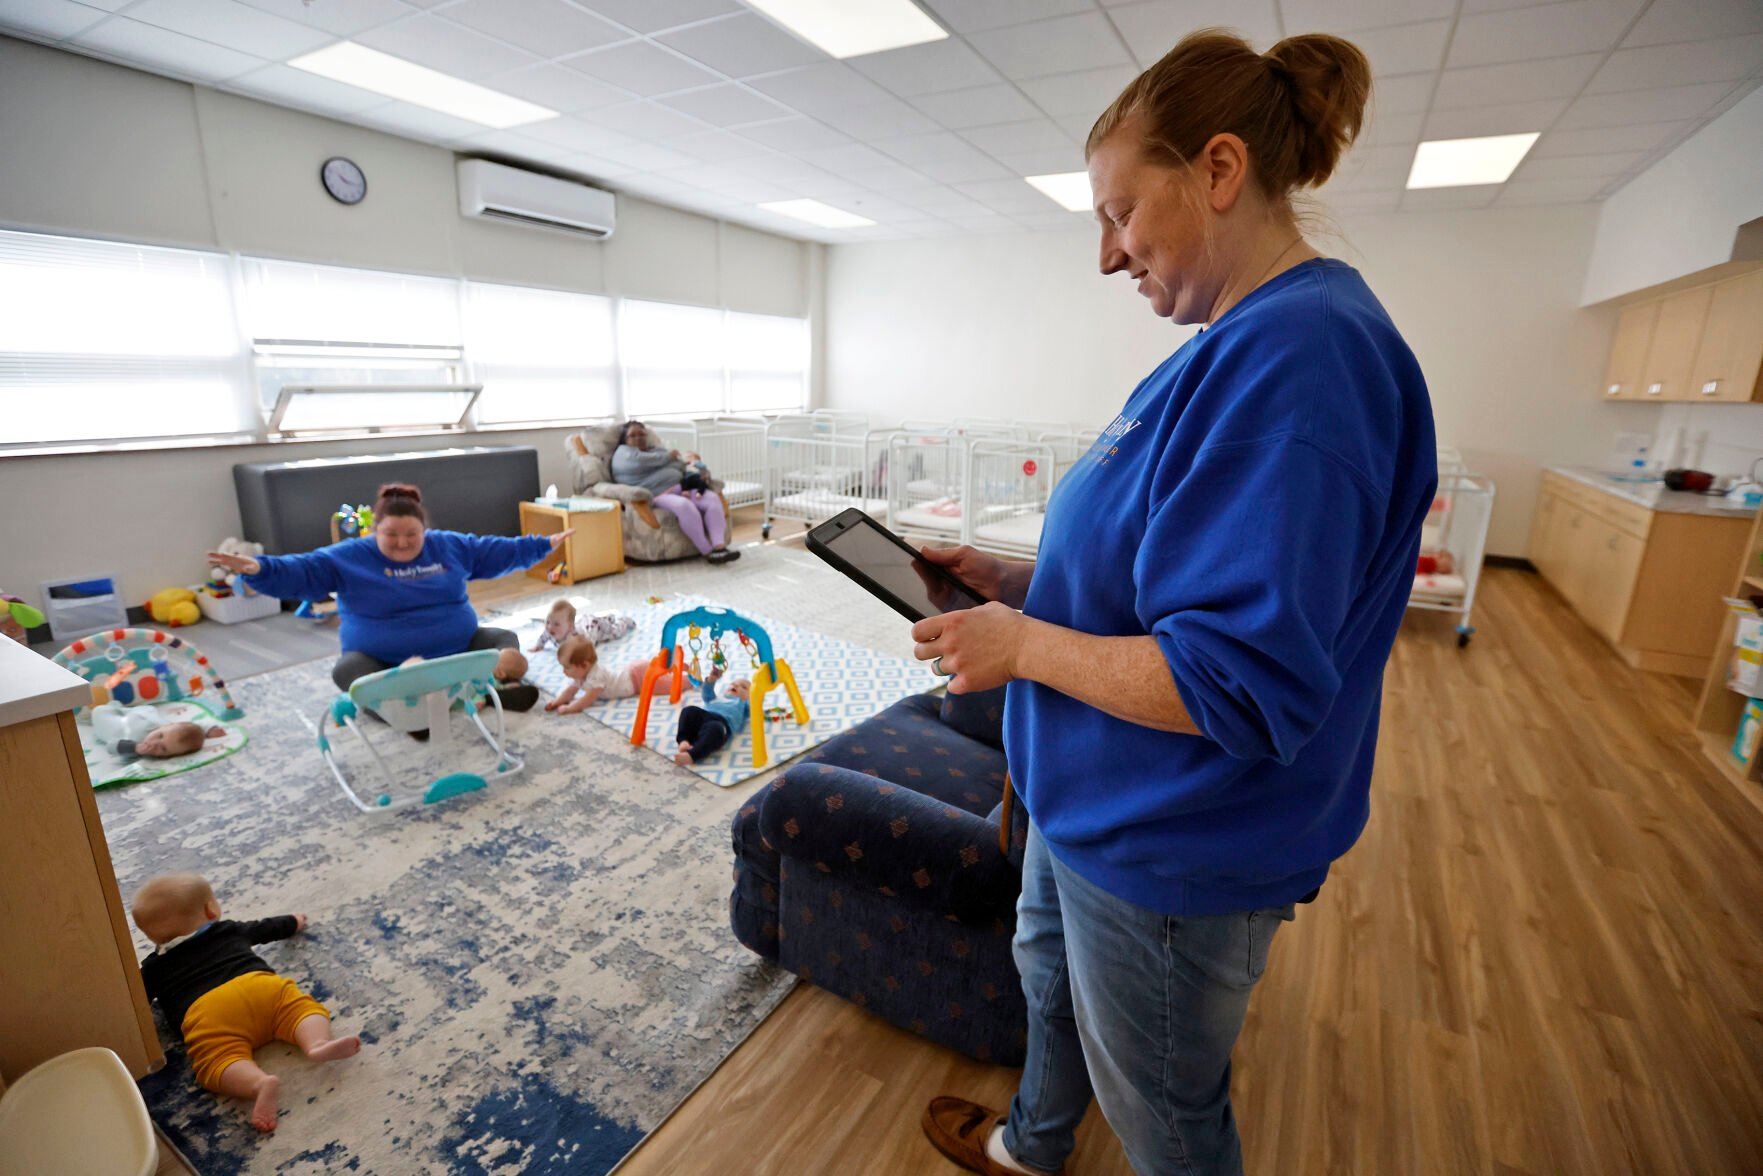 Alyssa Lawver, a child care associate, sends an update to a parent using the Procare app.    PHOTO CREDIT: JESSICA REILLY
Telegraph Herald